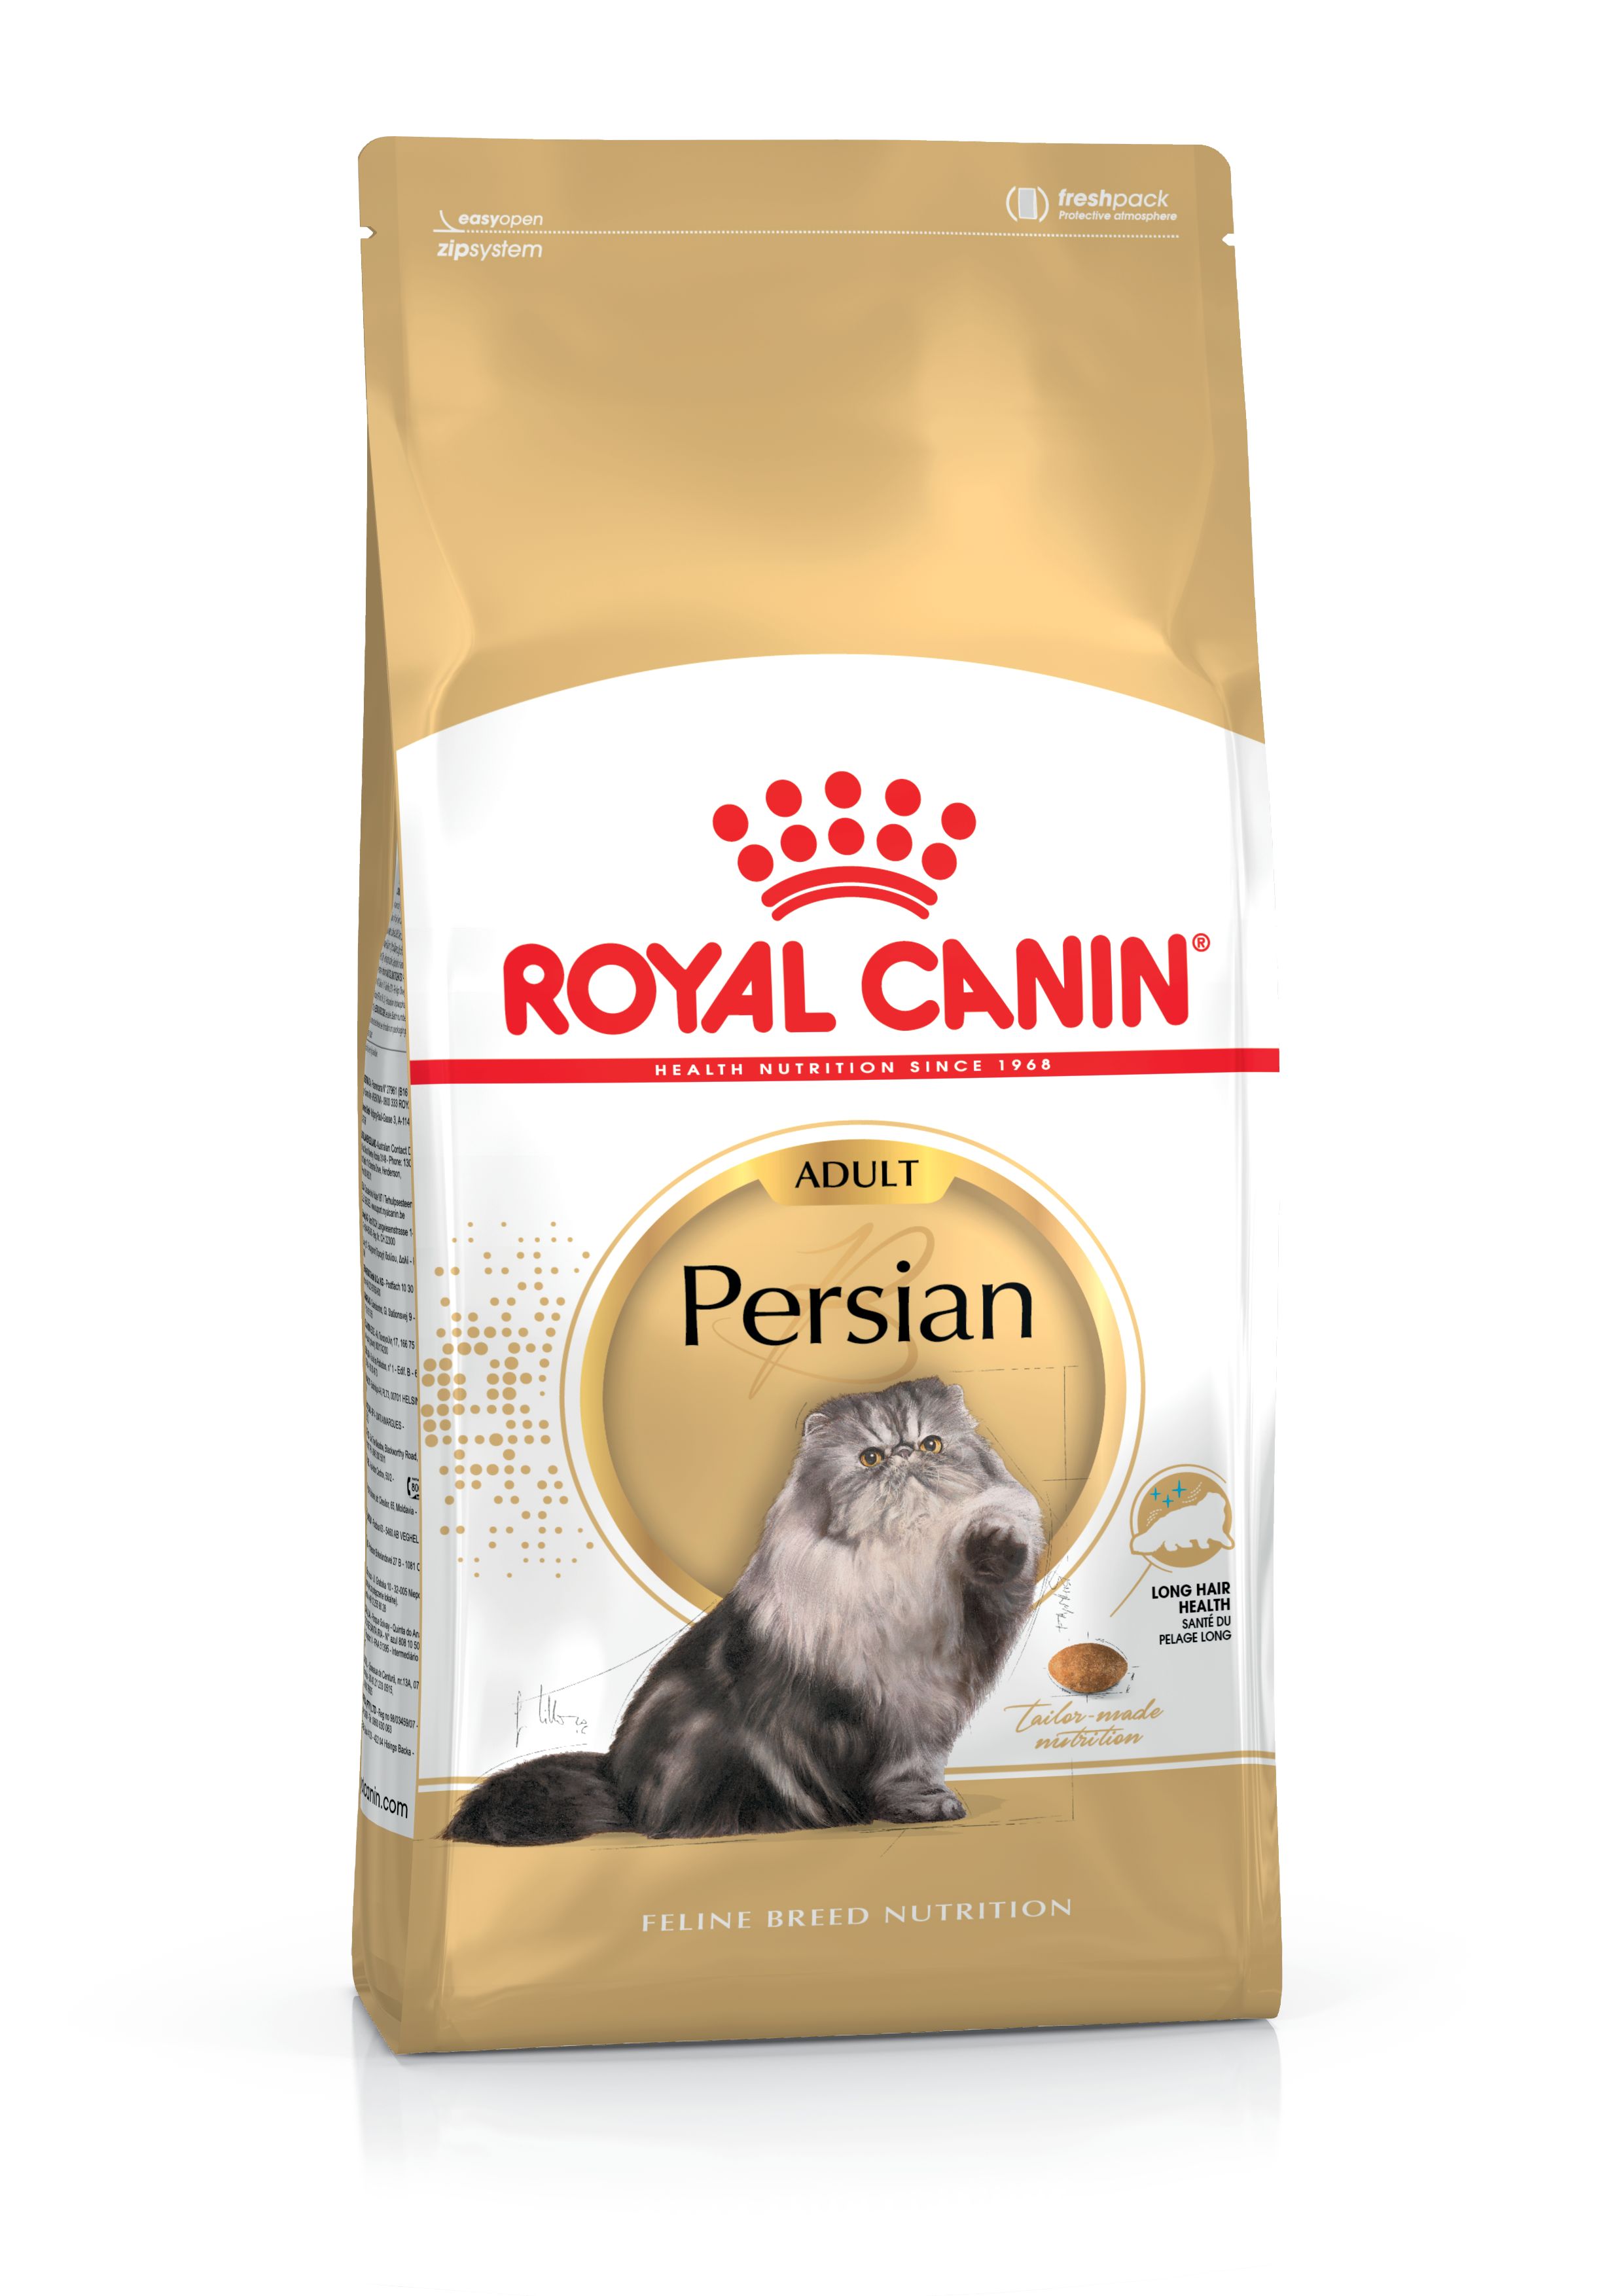 Royal Canin Persian ADULT 10 kg - Feed 